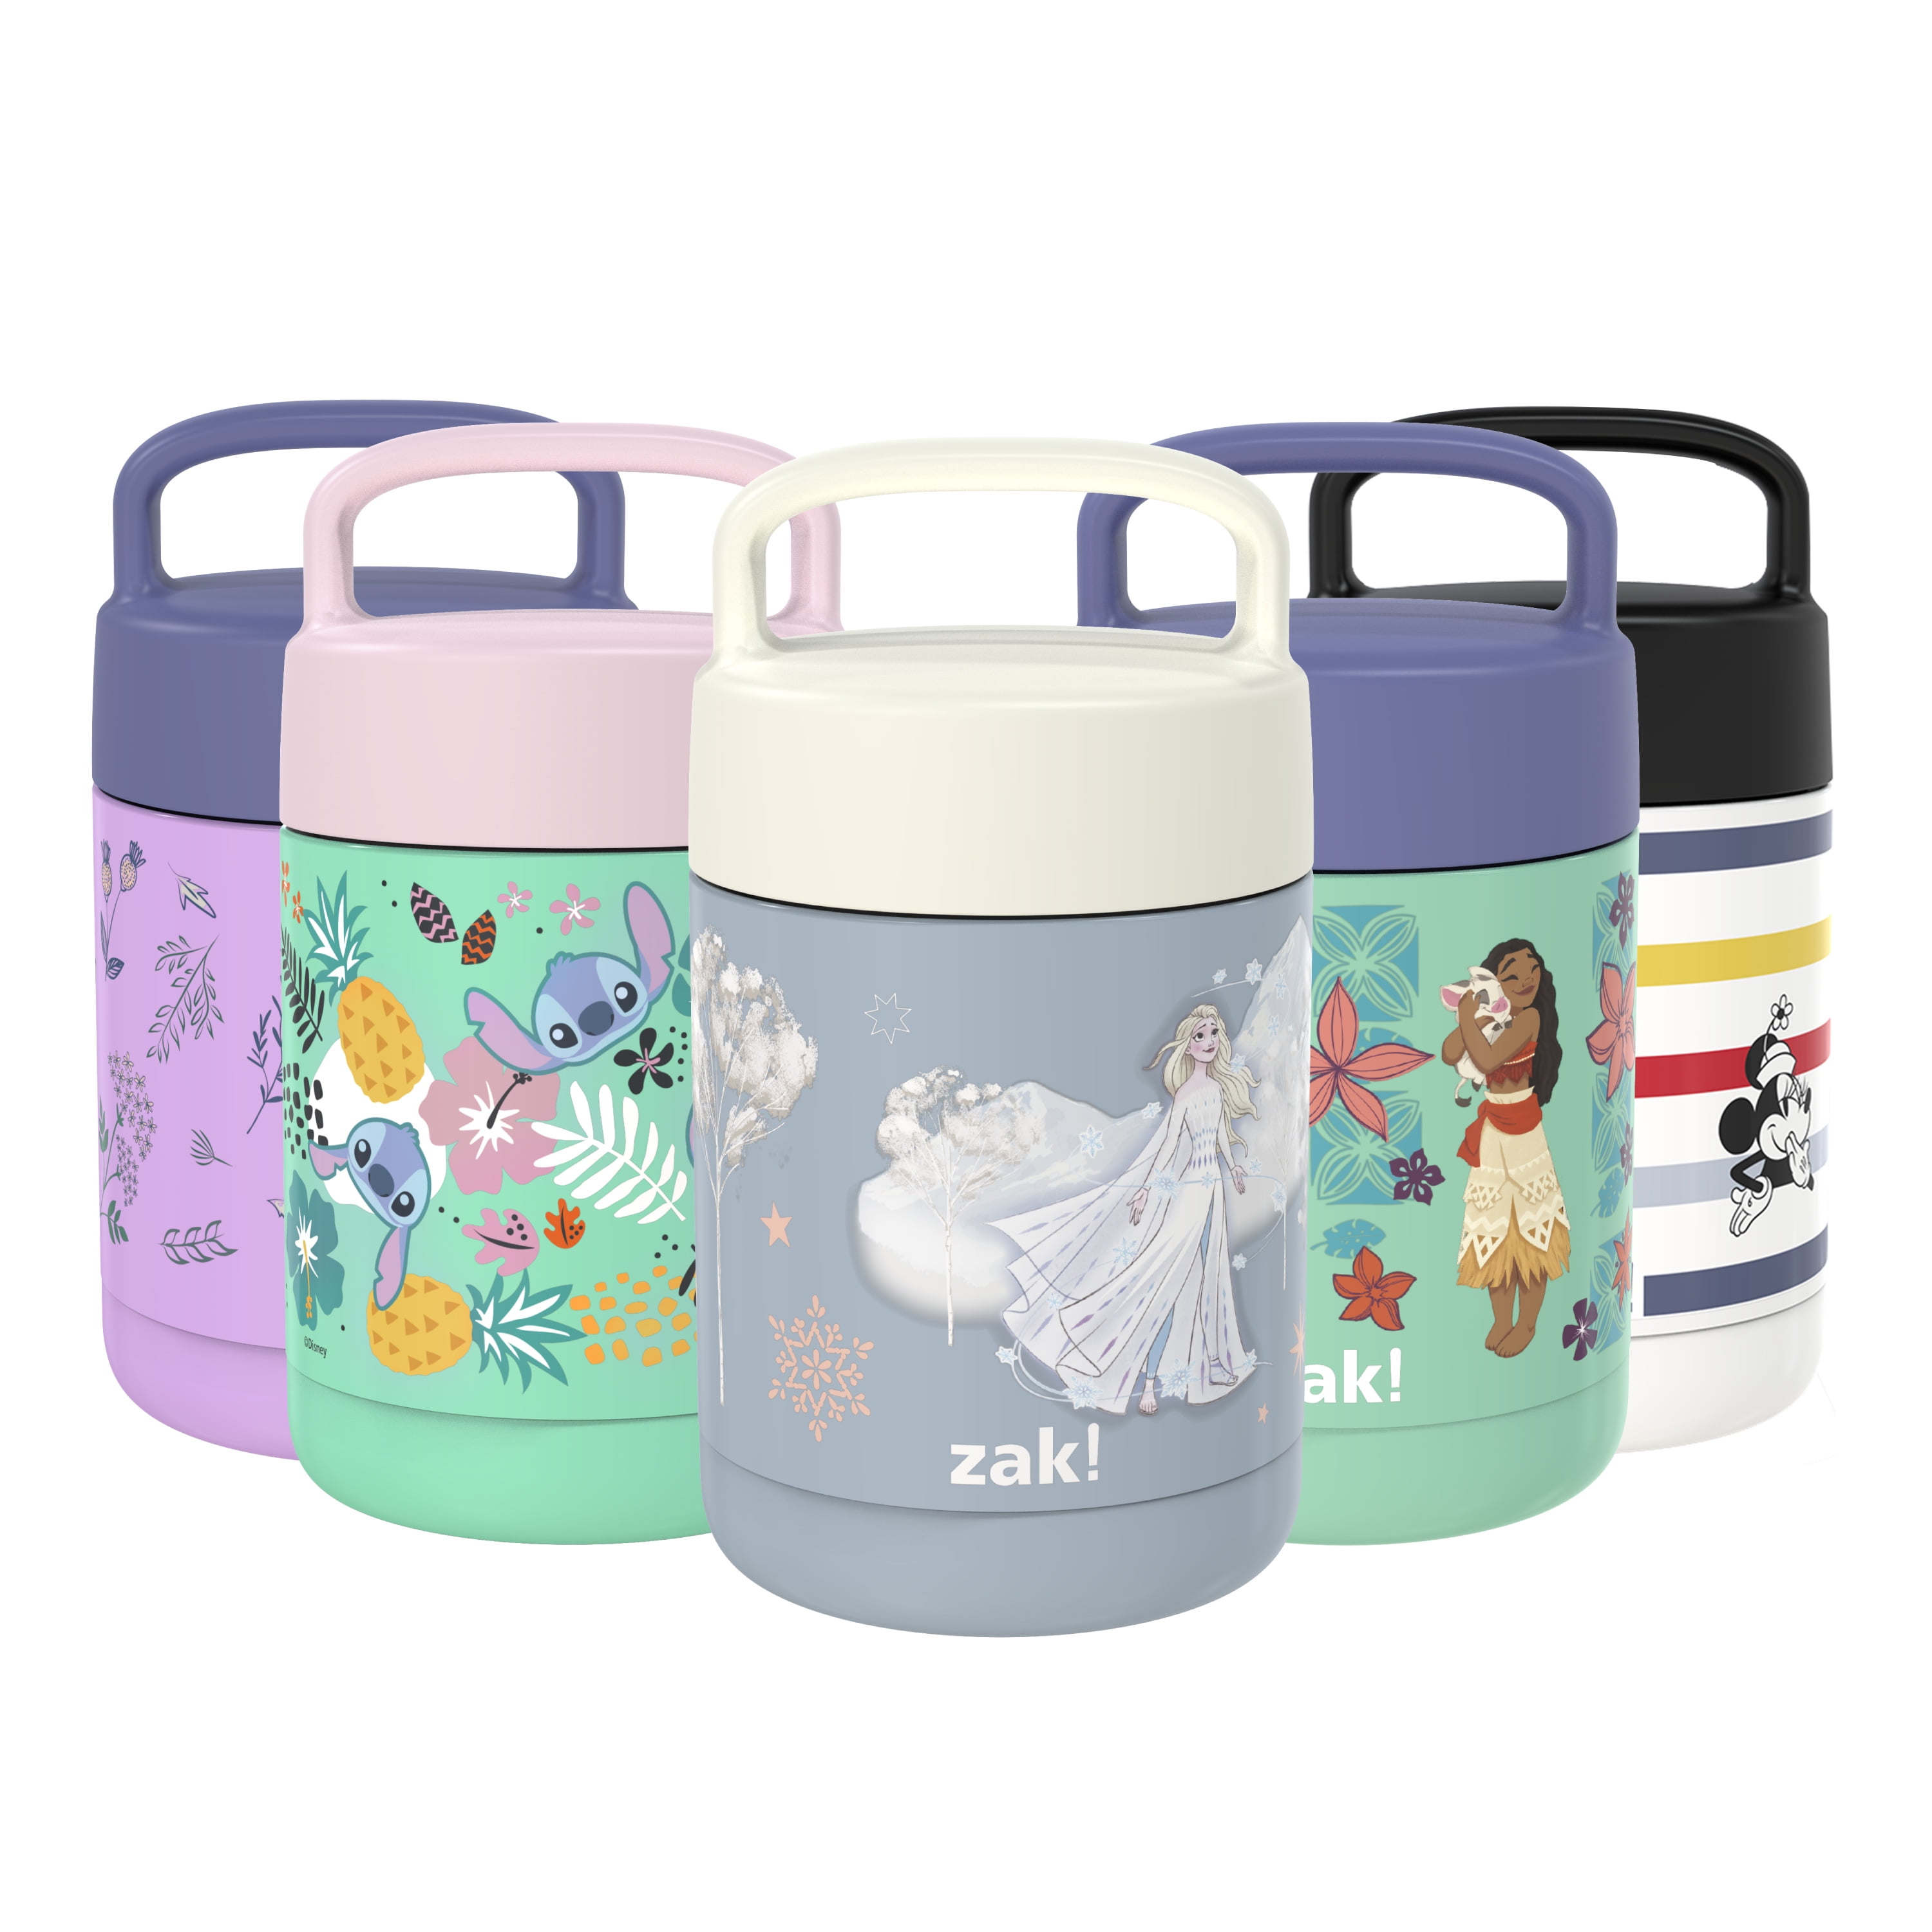 Zak Designs Character Snack Storage Containers for Kids 